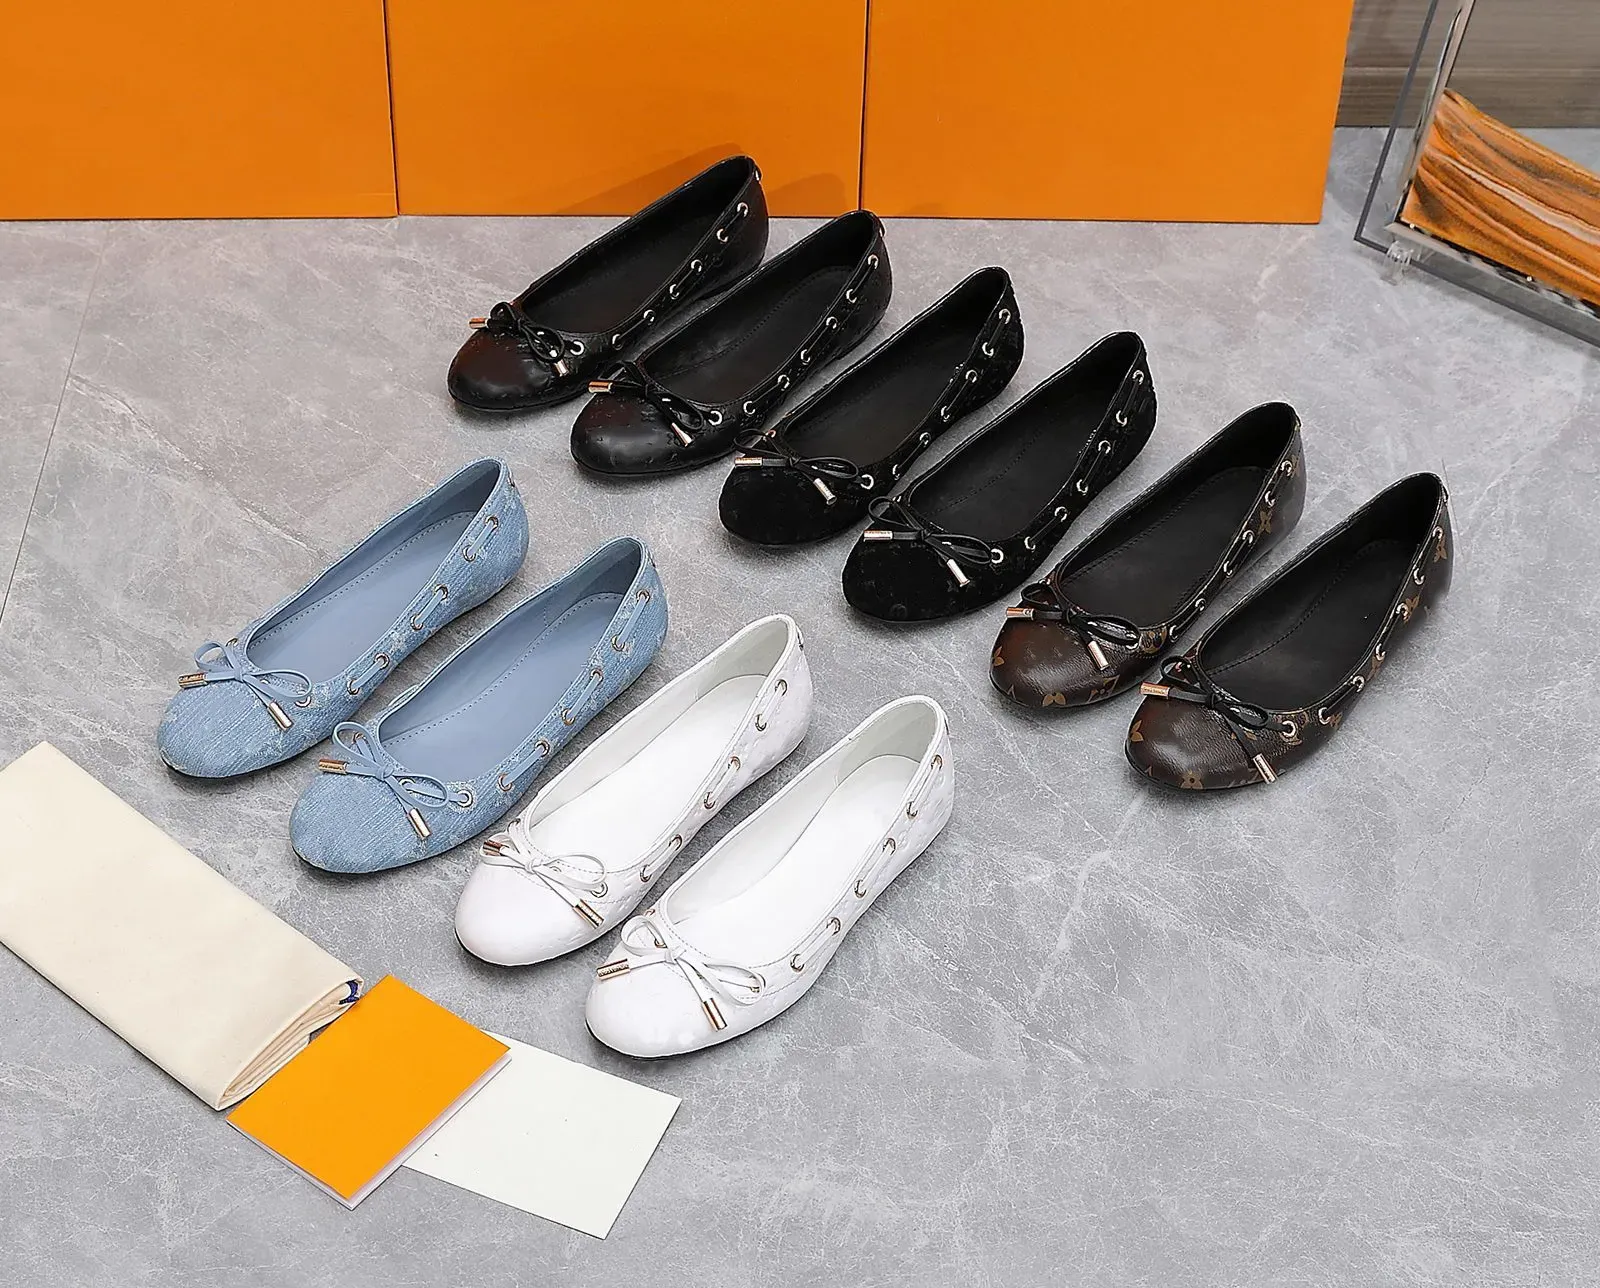 Real Leather Patchwork Women High Quality Bow Tie Flat Loafers Shoes New Ballet Flats Dress Shoes For Women Autumn Designer Brand